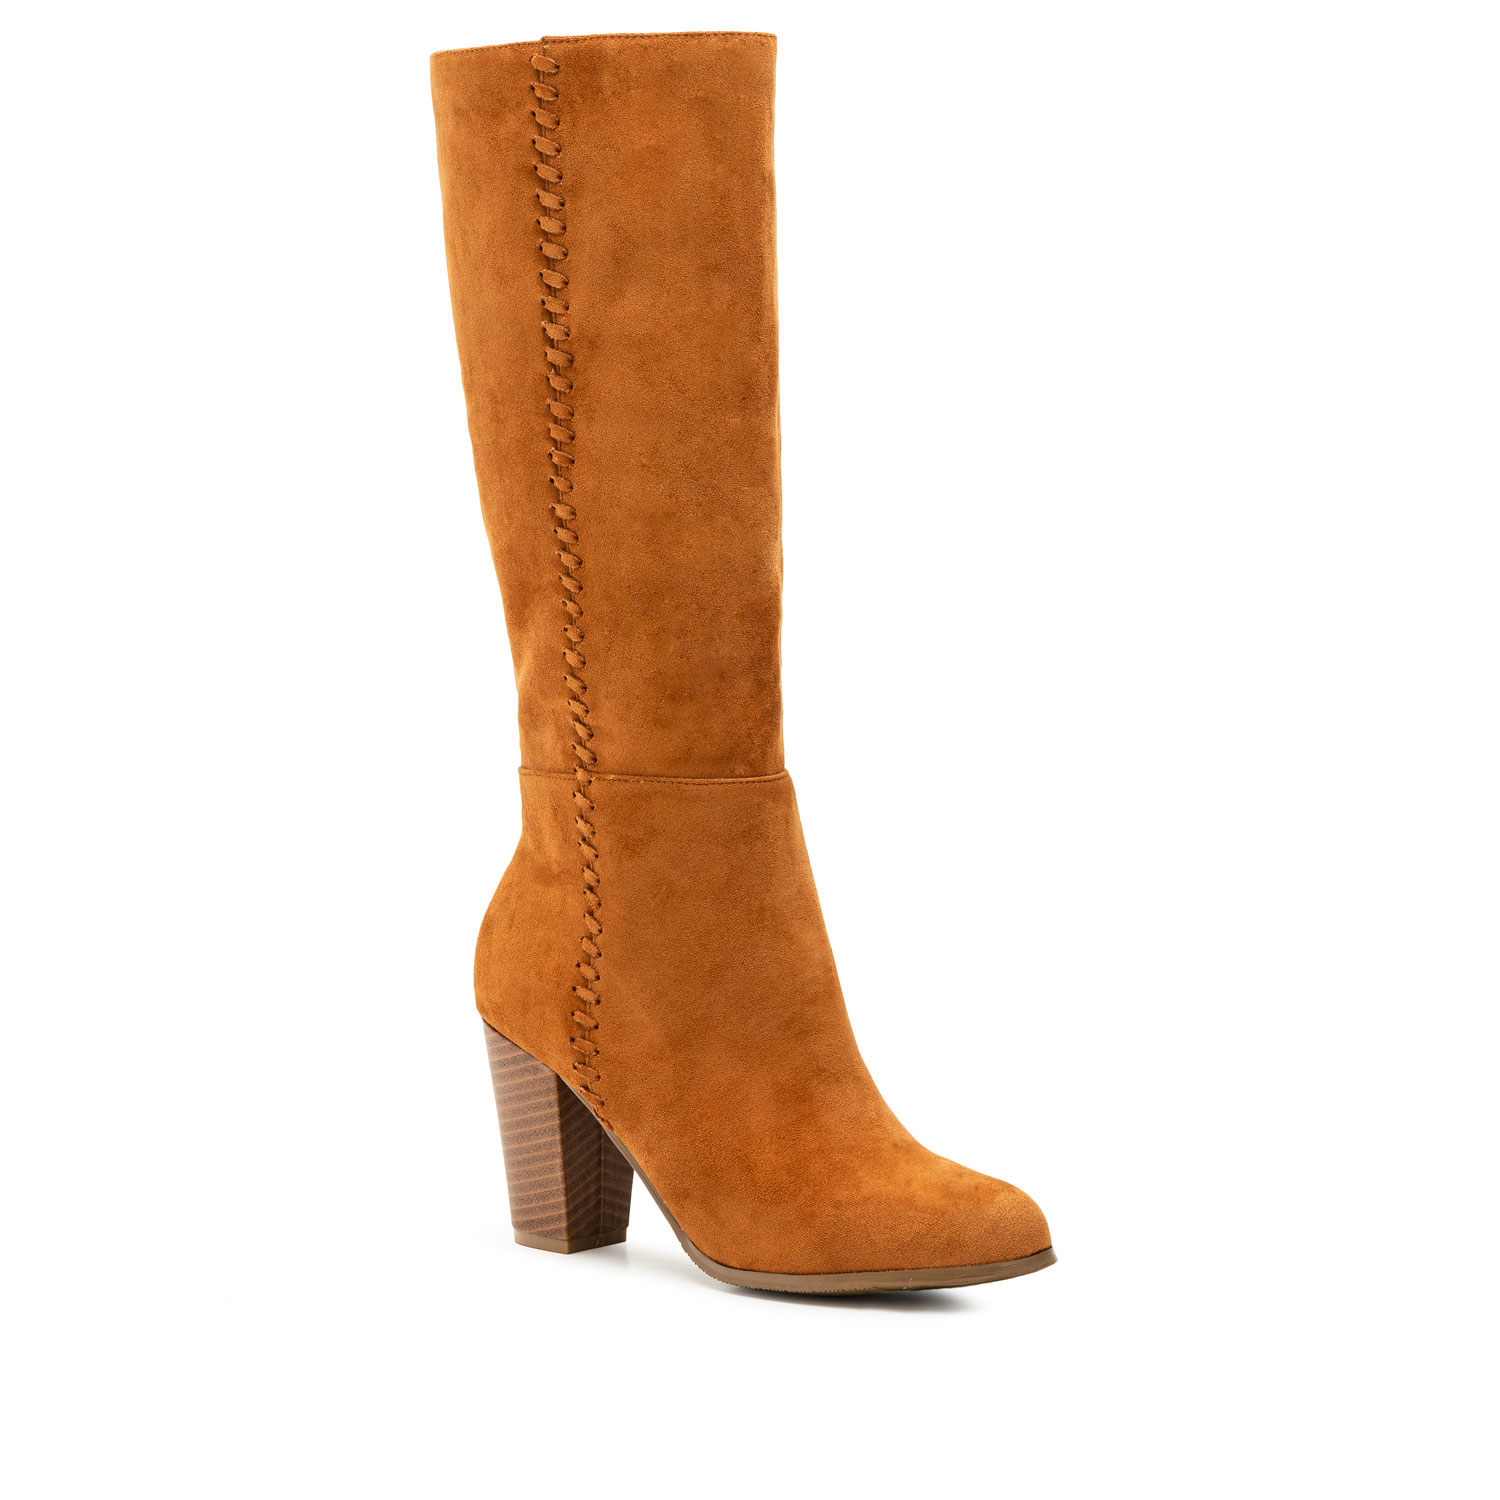 High Calf Boots in Camel Suedette 